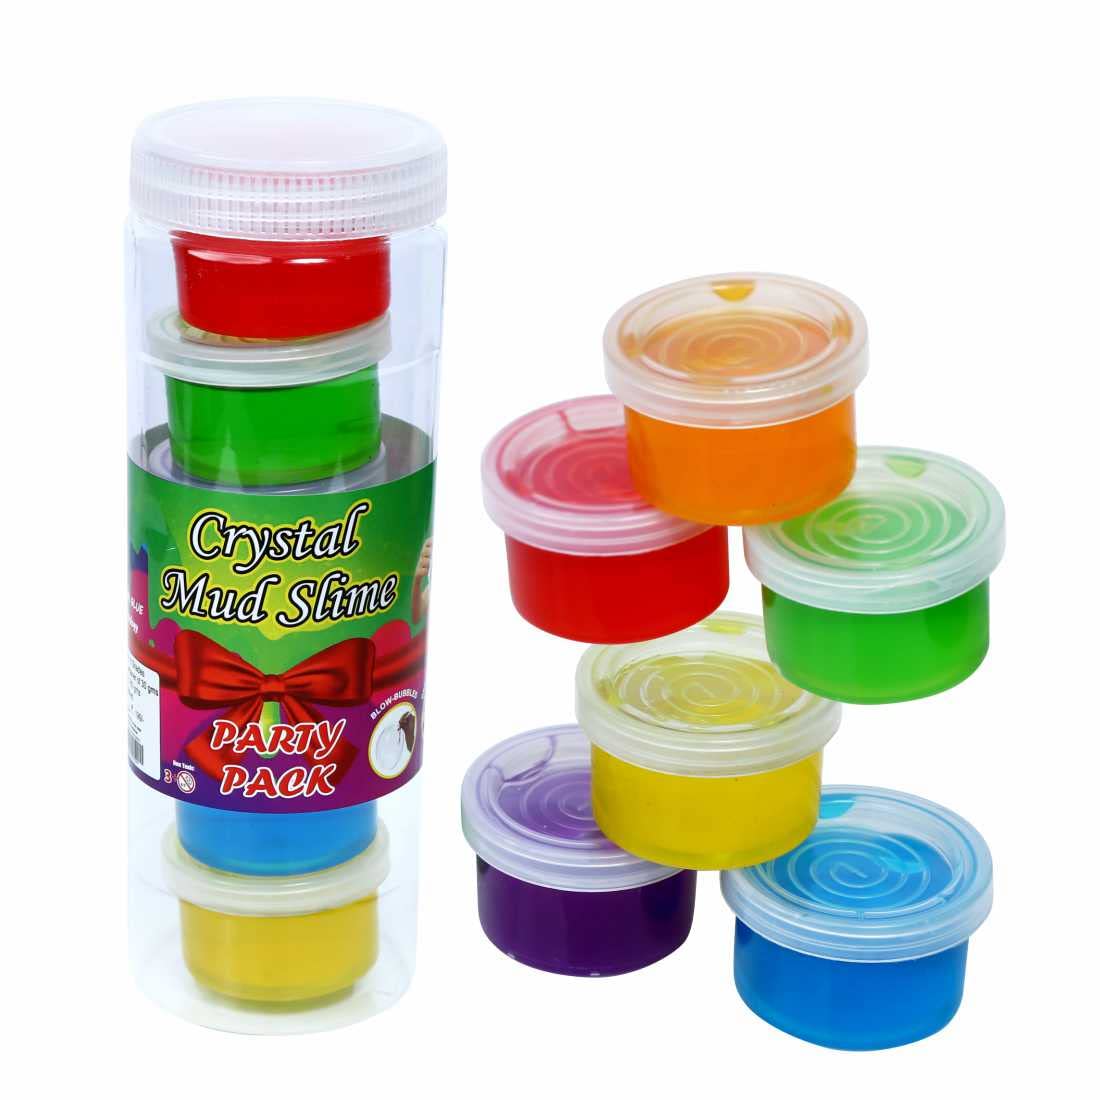 ART & CRAFT Pack of Slime (Crystal Mud Slime) Clay jel Jelly Putty mud Toy kit Set Toys for Girls Boys Kids Bottle Slime